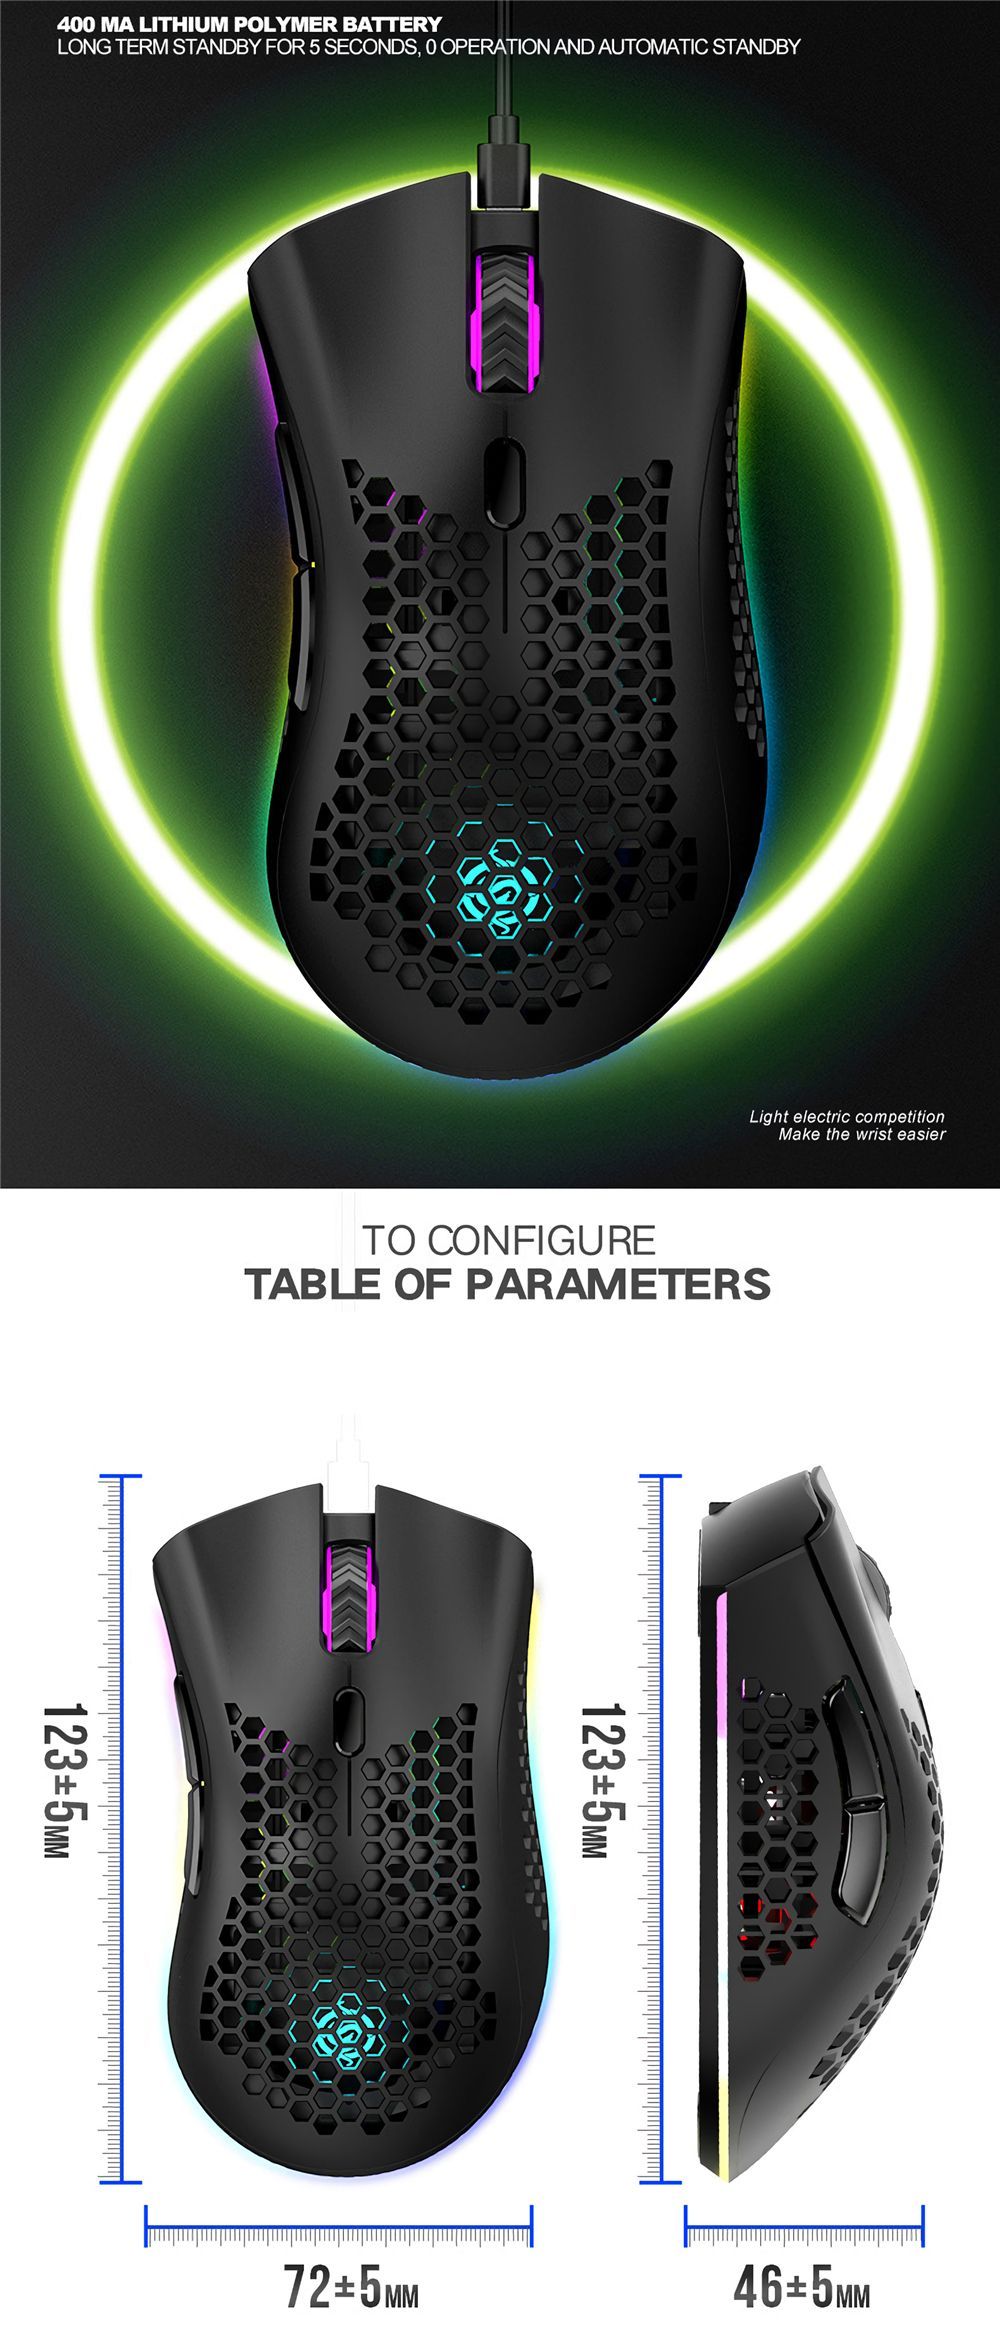 BM600-24GHz-Wireless-Rechargeable-Mouse-1600DPI-Optical-Game-Mouse-for-Laptop-PC-Computer-1720086